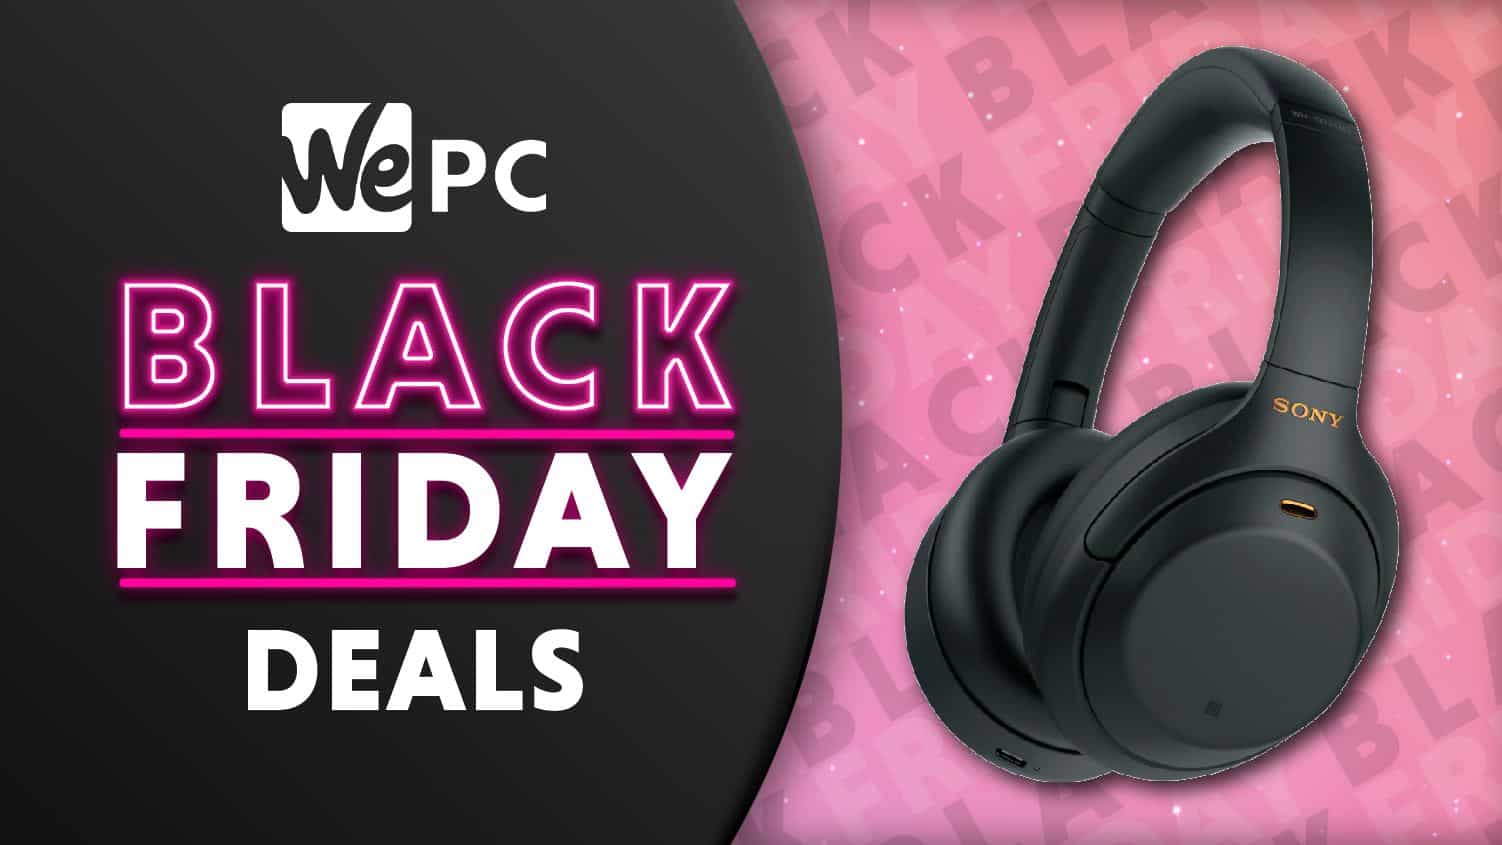 Save $100 on the Sony WH1000XM4 Noise-canceling headphones Black Friday deals